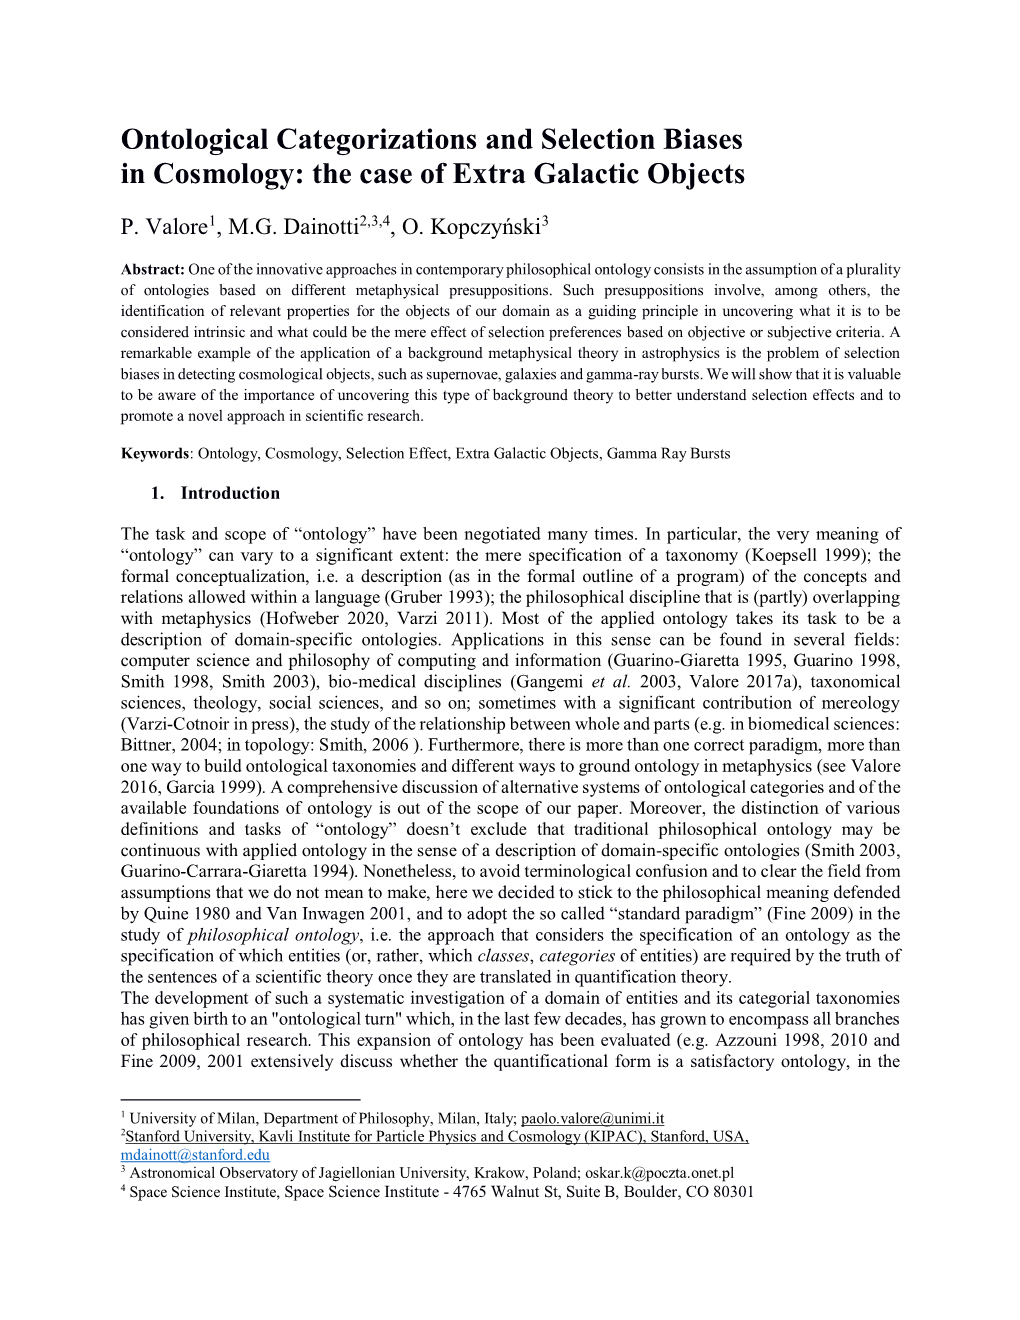 Ontological Categorizations and Selection Biases in Cosmology: the Case of Extra Galactic Objects